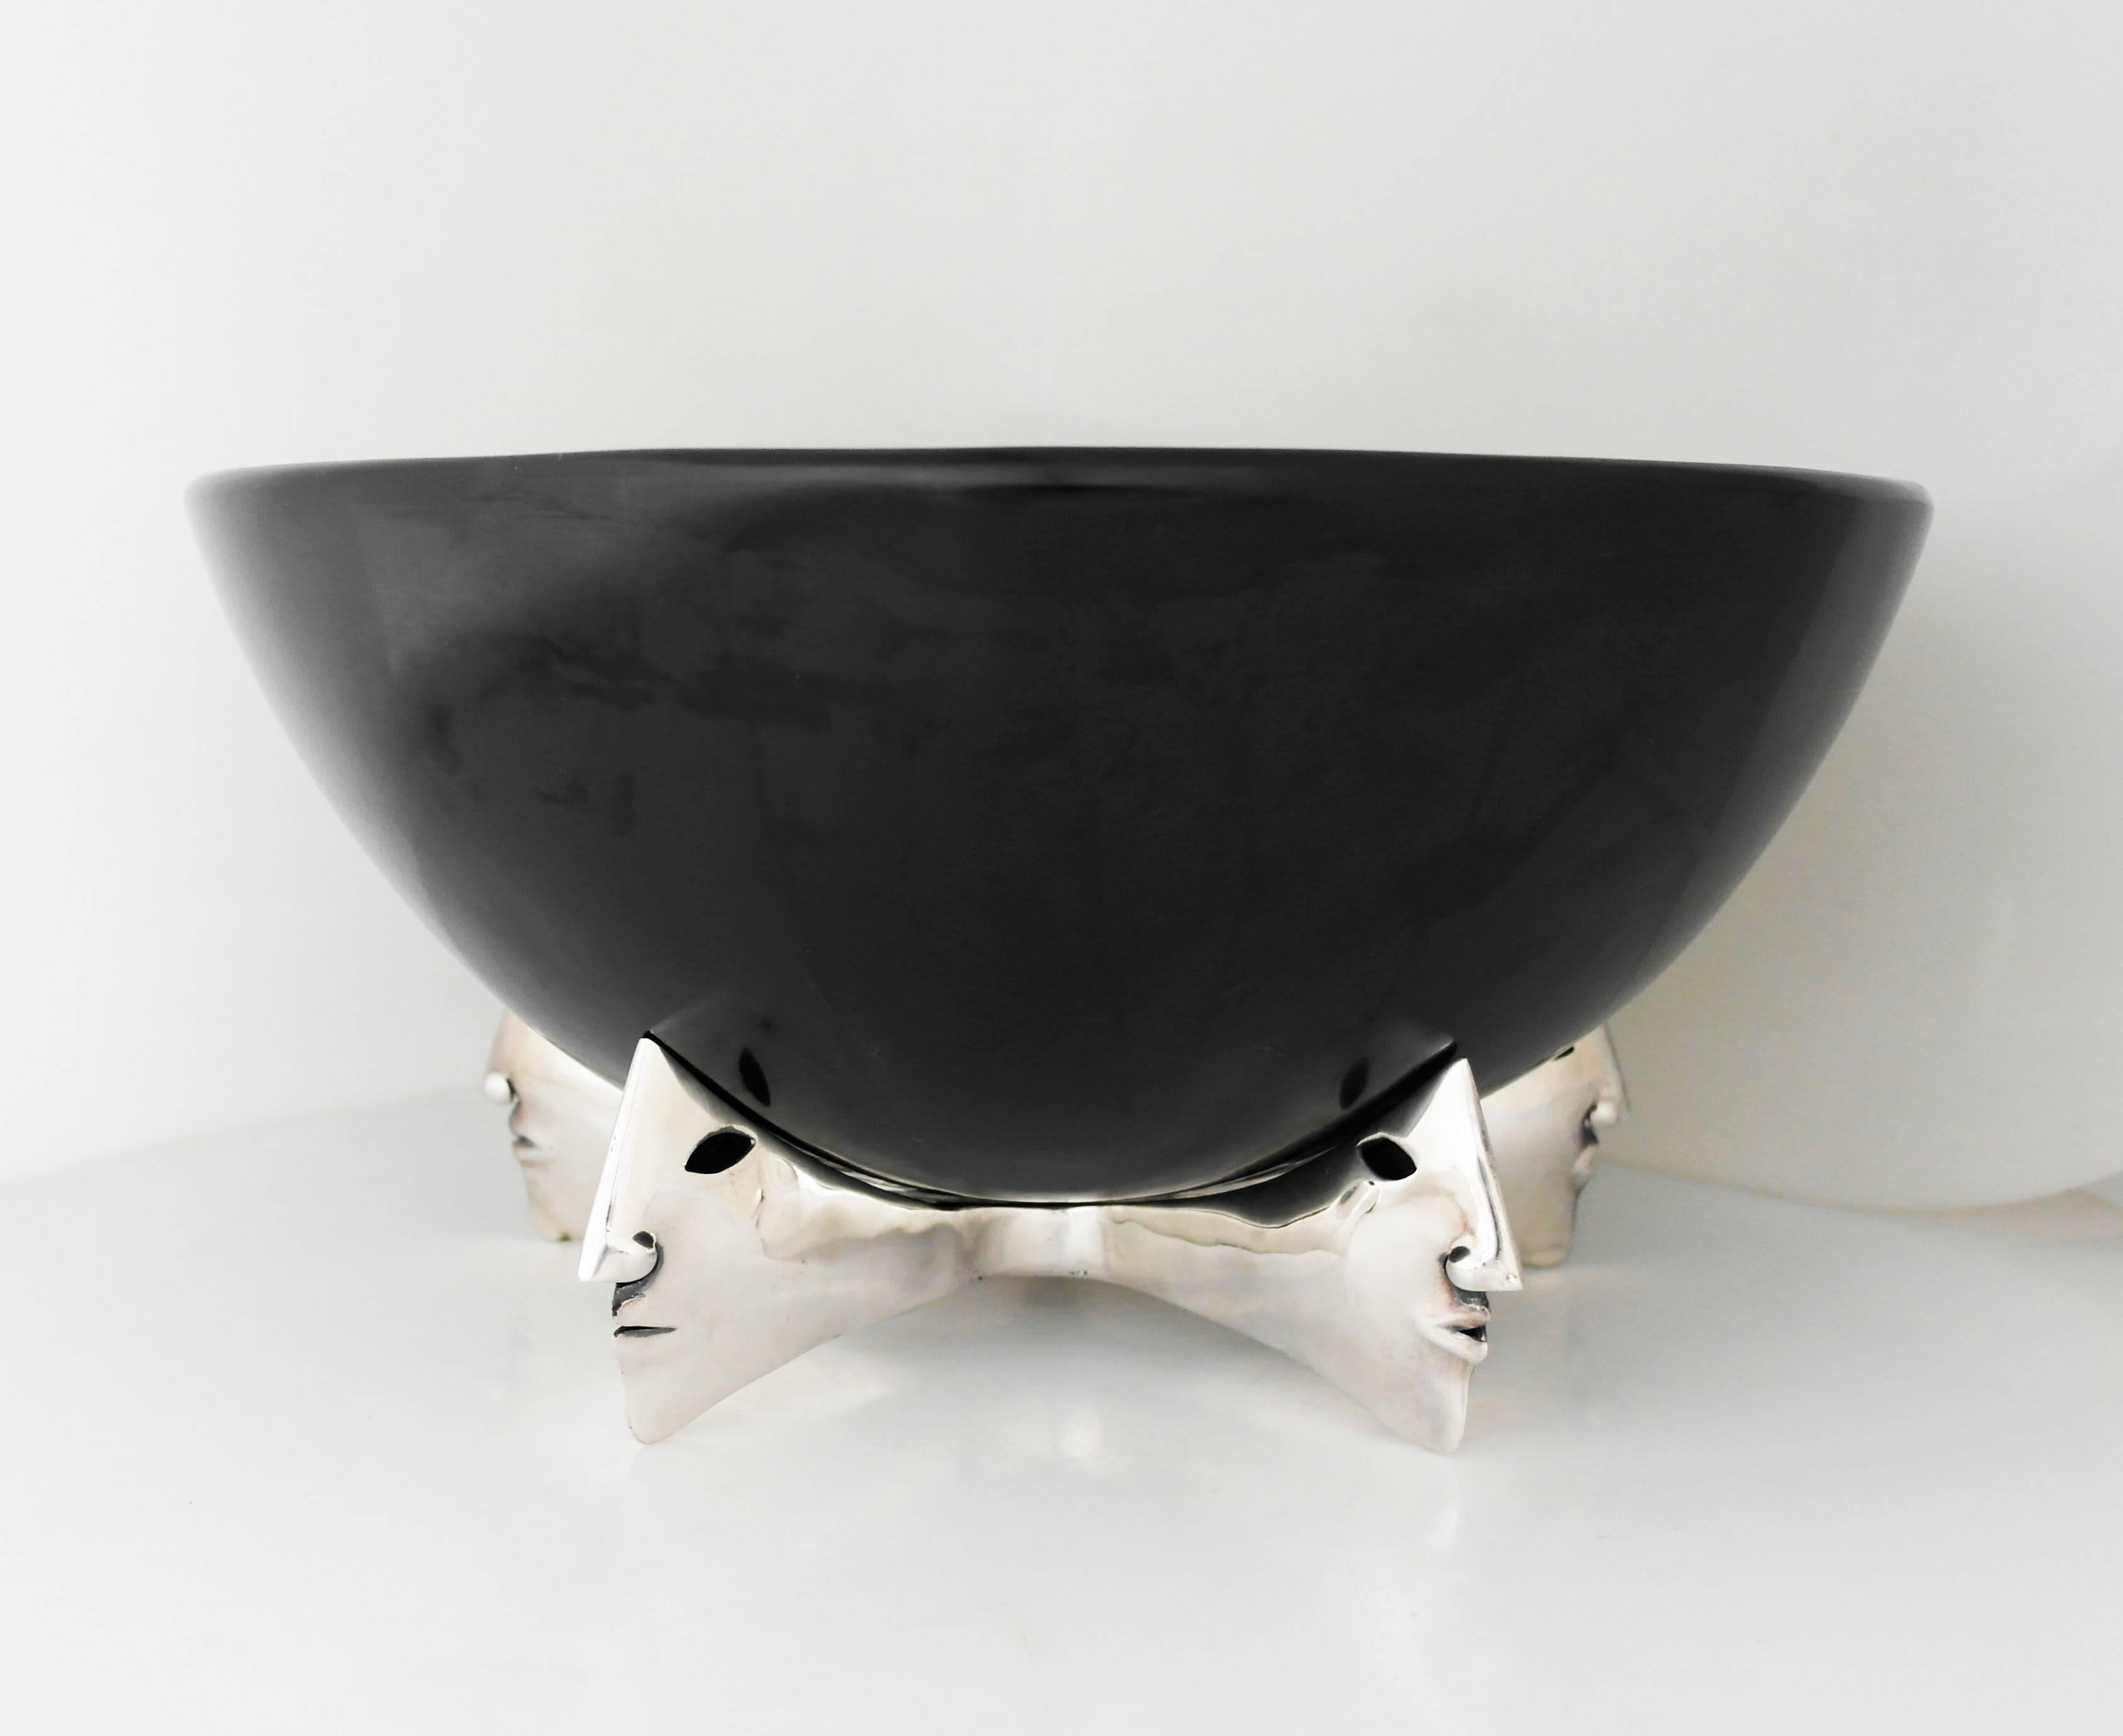 Being offered is a large and stupendous centerpiece bowl by Emilia Castillo of Taxco, Mexico. Comprising a stone carved bowl of simple form, resting on a sterling silver modernist stand revealing five profiles of Pre-Columbian influence. Dimensions: